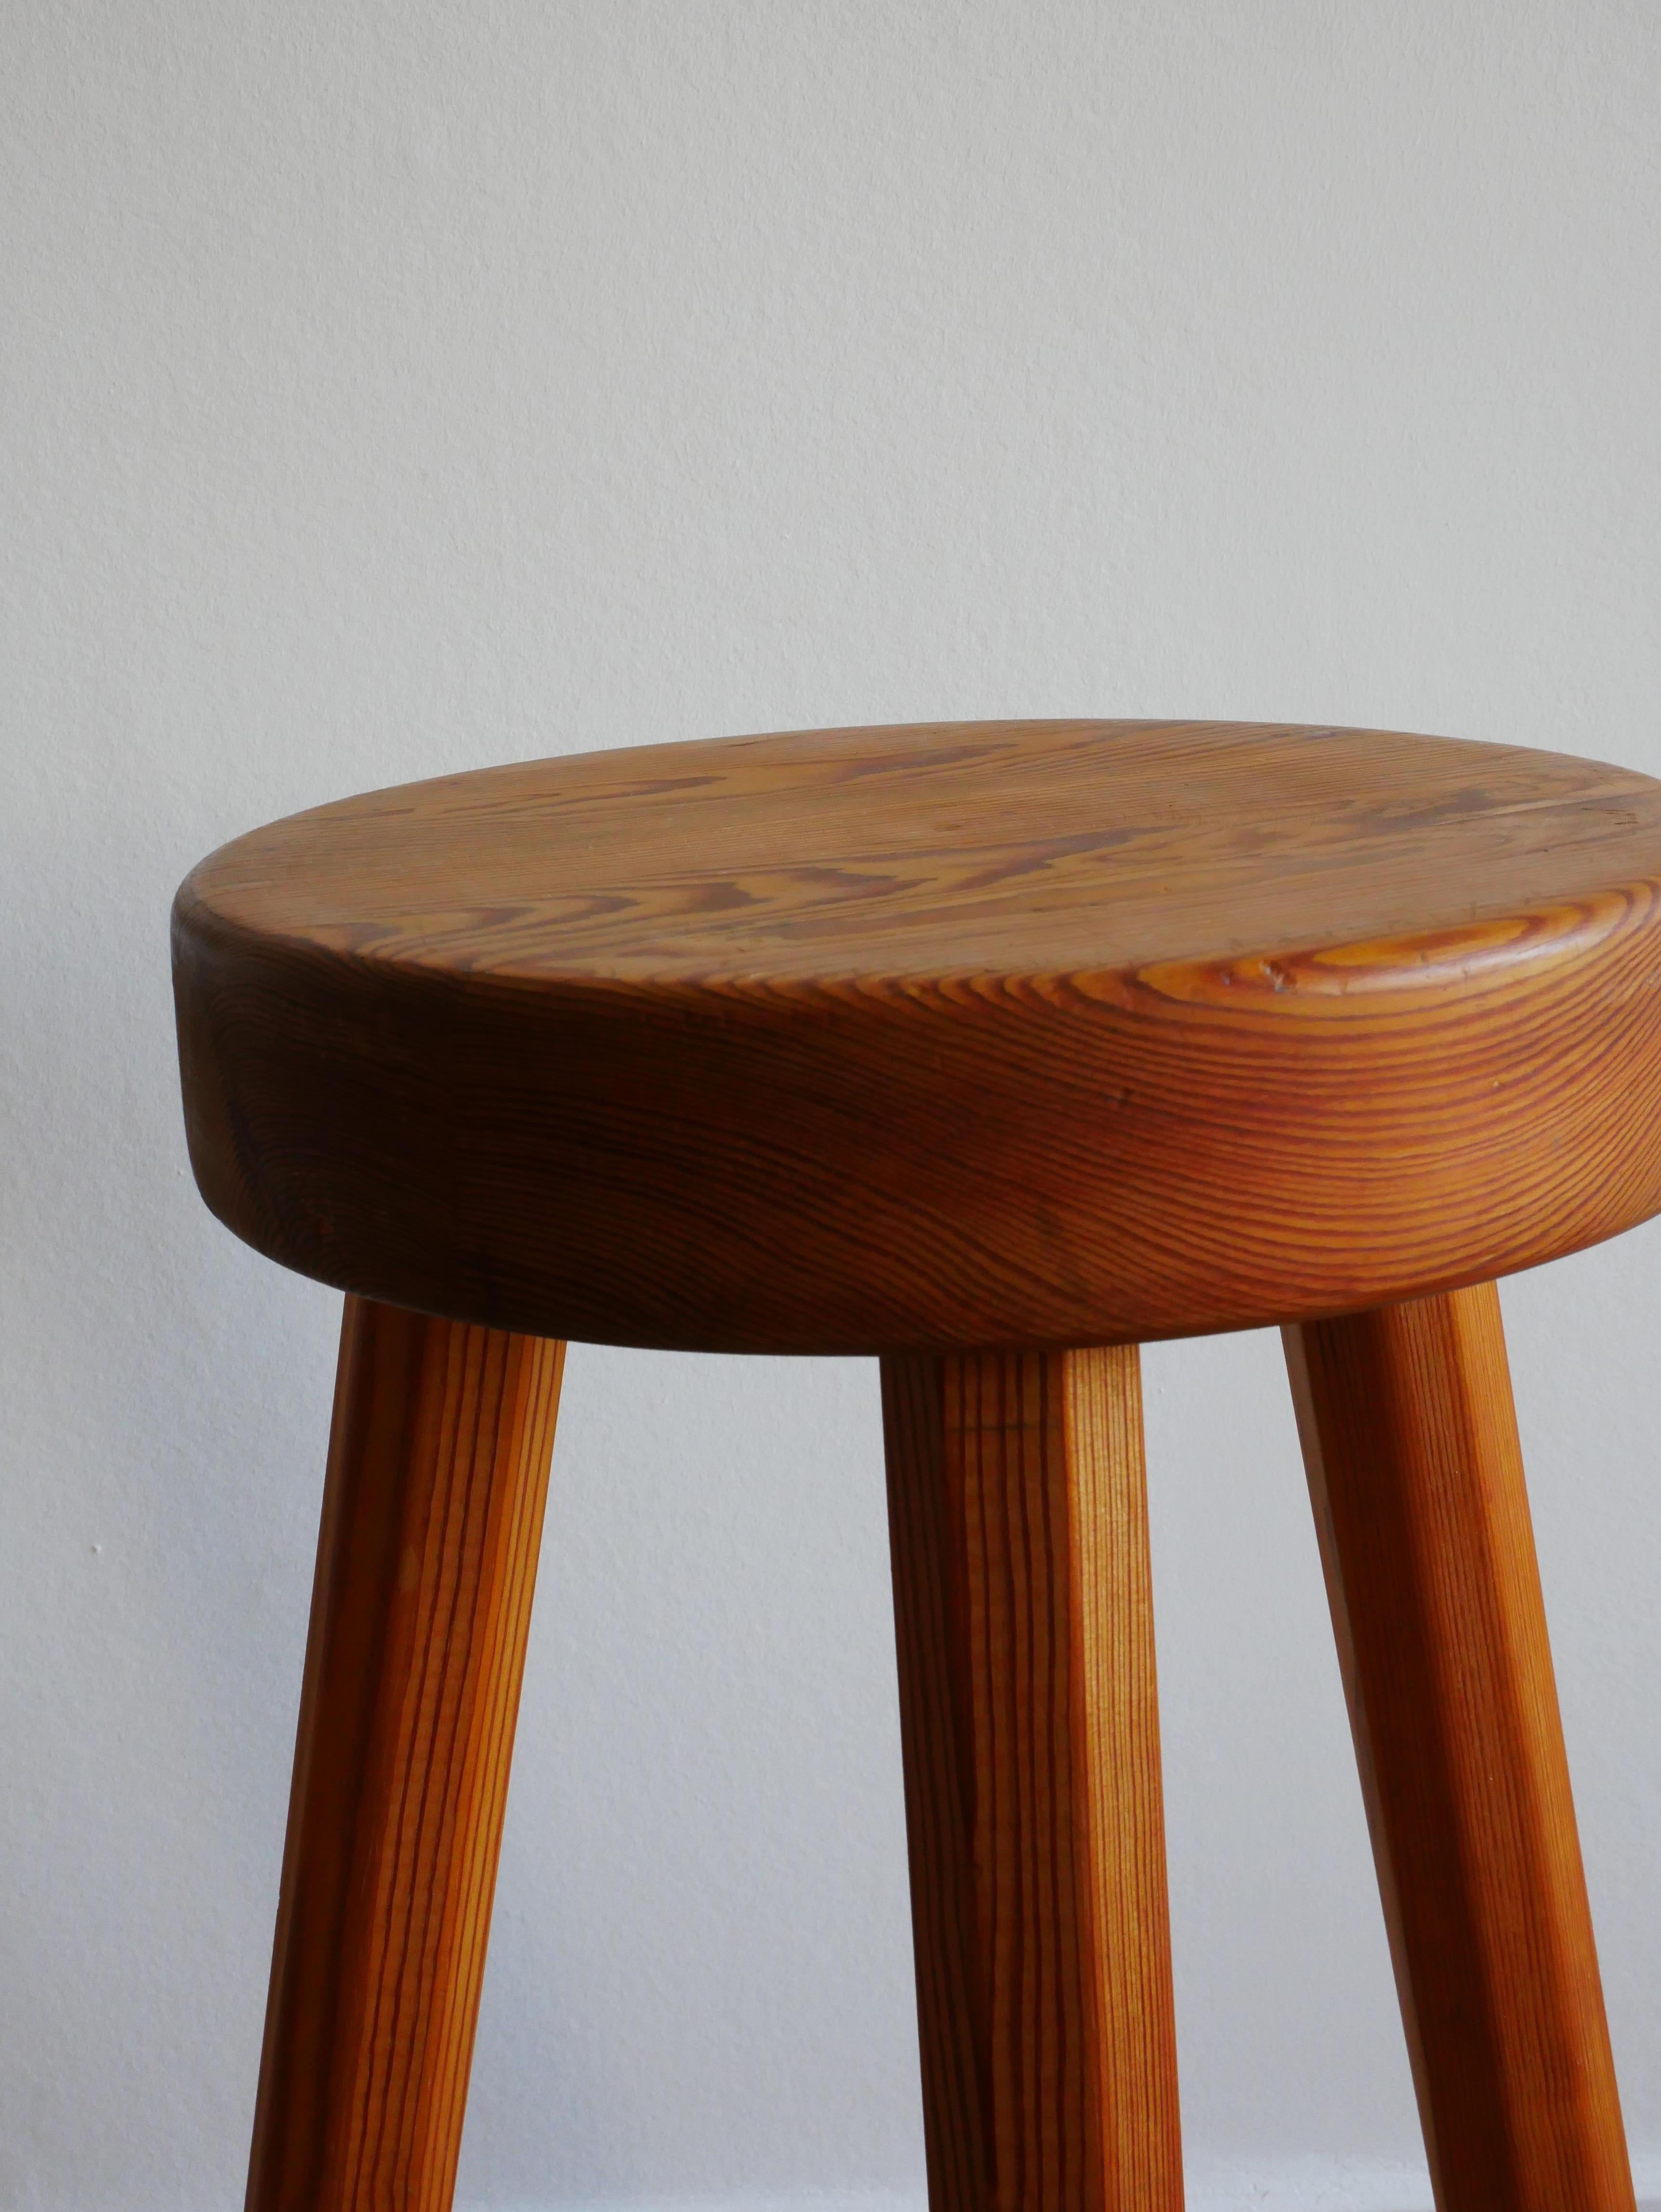 Three legged stool in solid pine
Sweden, cirka 1960

Great patina that really makes the wood grain stand out

Heigth: 53 cm
Seat Diameter: 29 cm.